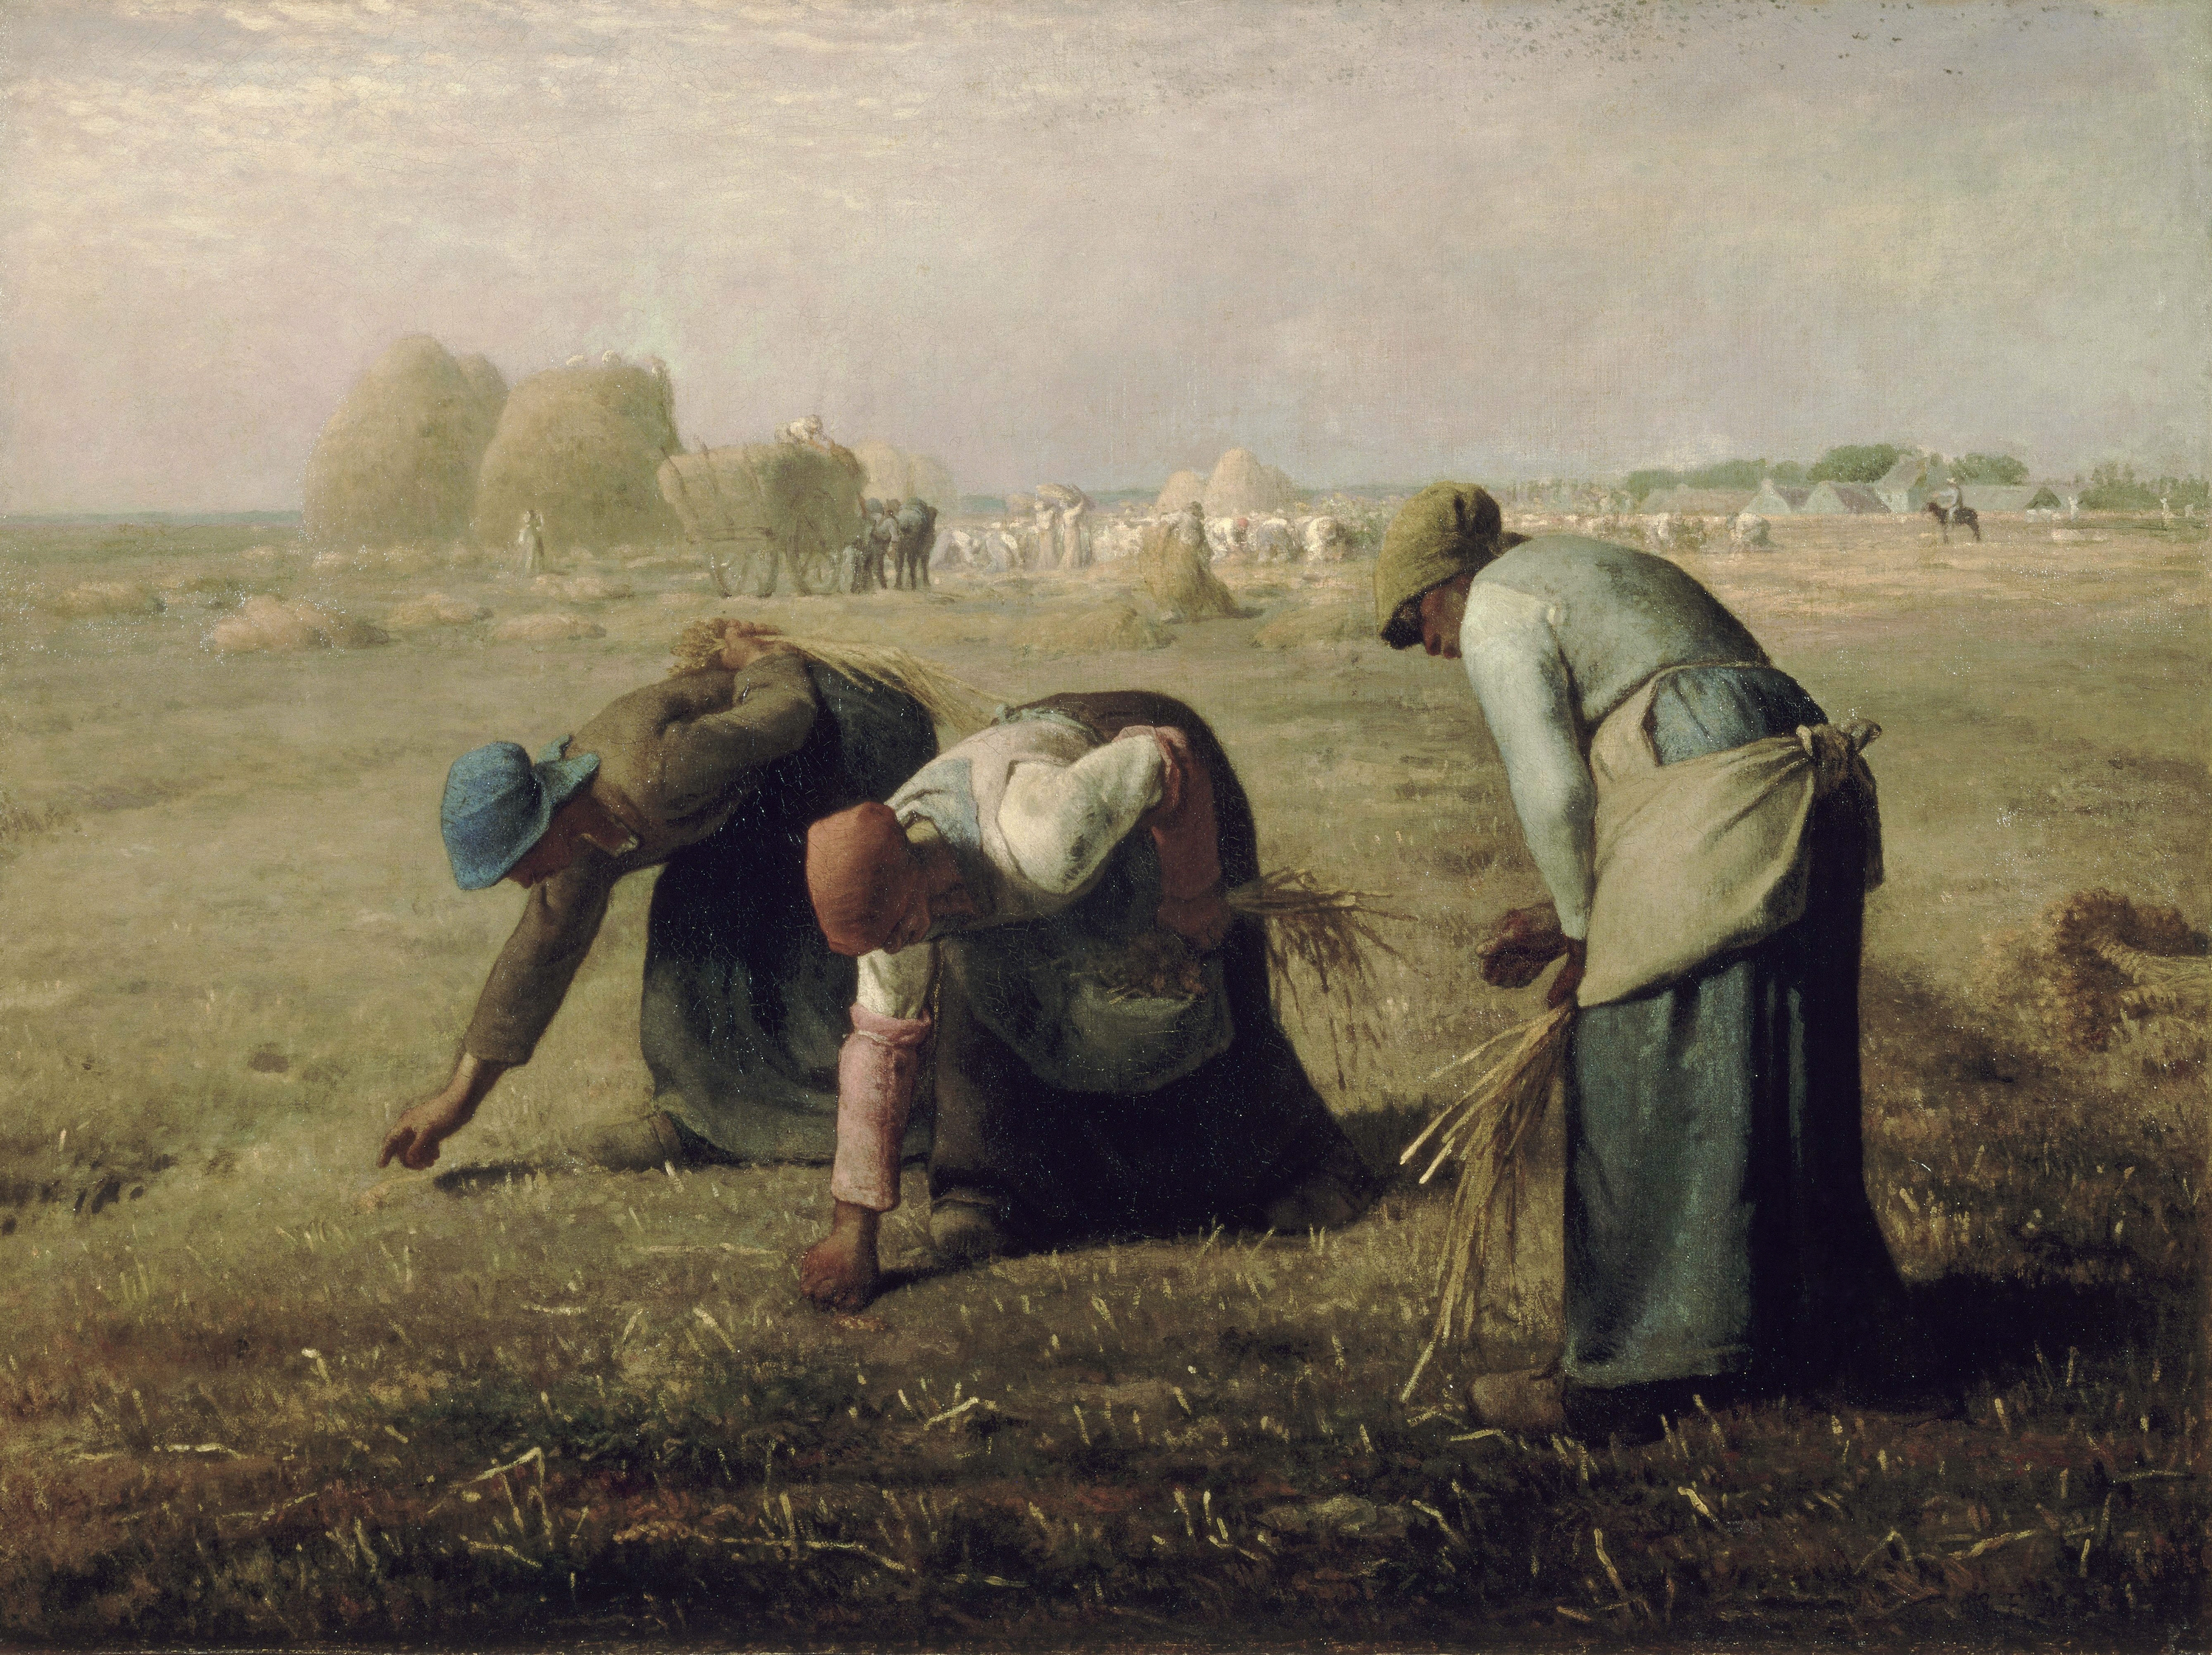 The Gleaners by Jean-François Millet - 1857 - 83.8 × 111.8 cm Musée d'Orsay